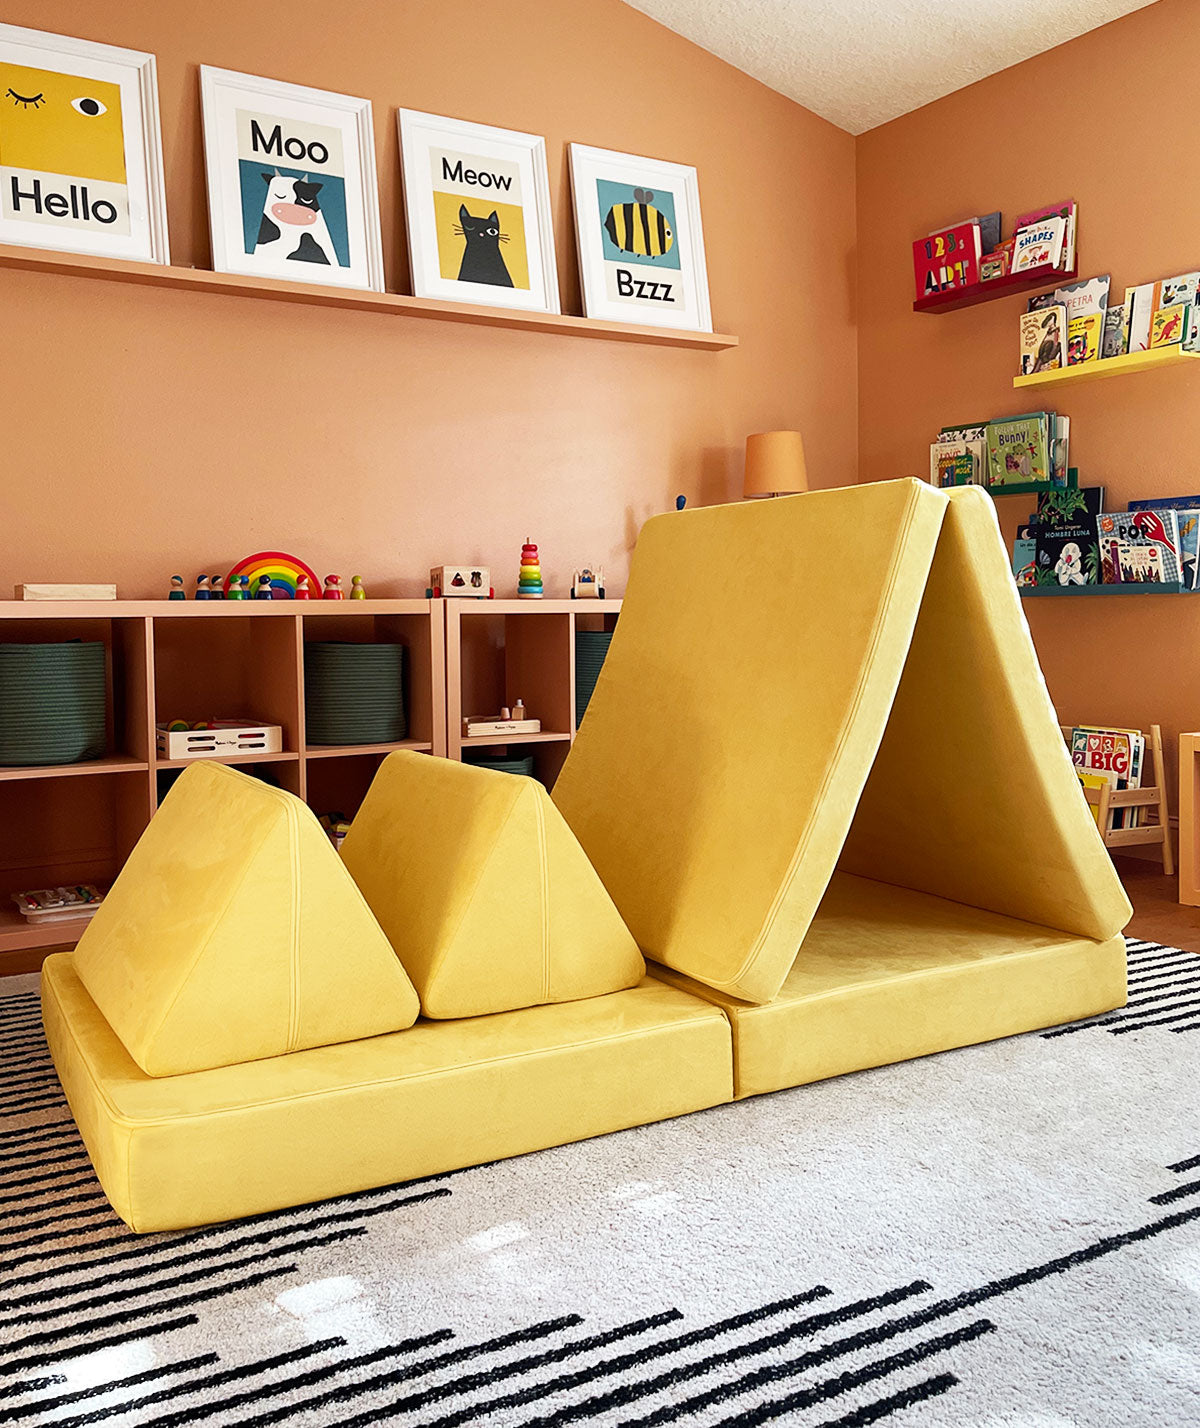 Lemonade Nugget positioned as a cozy fort in a playroom